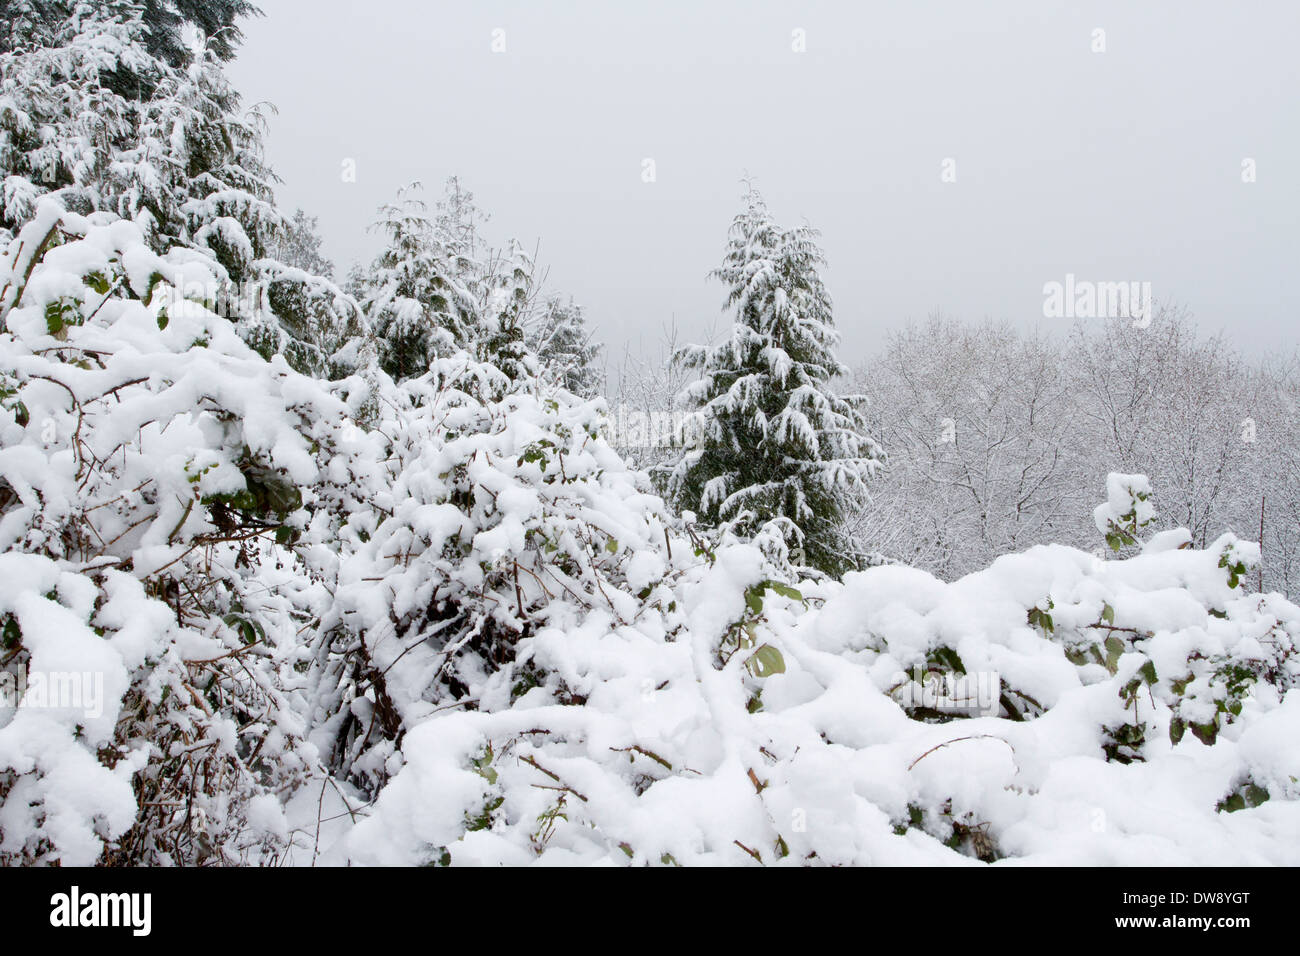 Winter snow scene showing snow covered trees & bushes along coastline in north Nanaimo, Vancouver Island, BC, Canada in February Stock Photo